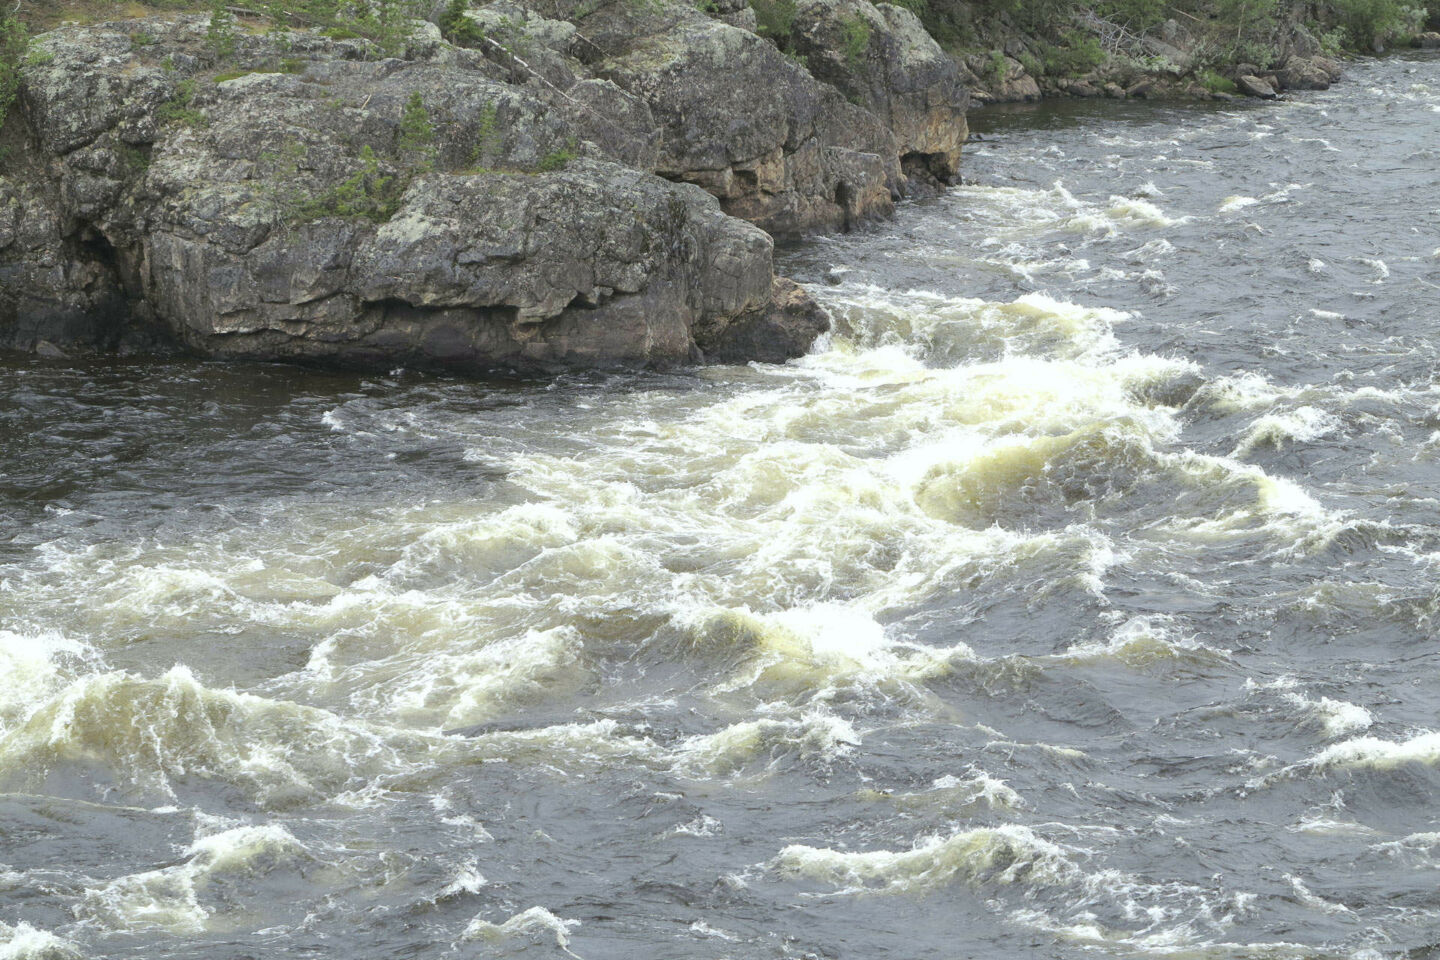 Whitewater at theAijakoski rapids in Muonio, a Finnish Lapland filming location